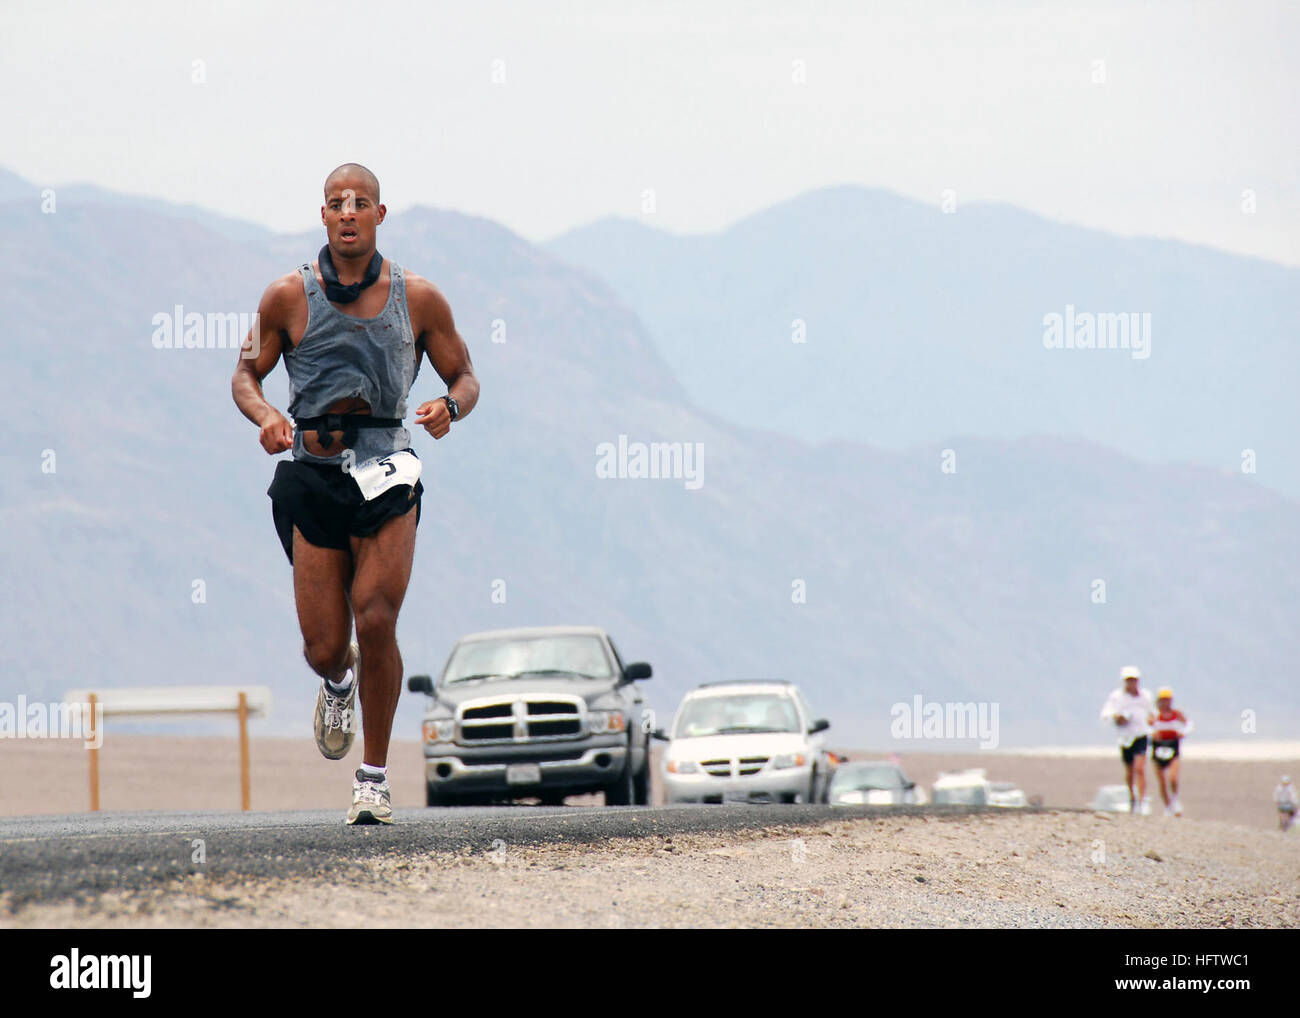 070723-N-6138R-001  SAN DIEGO (July 23, 2007) - U.S. Navy SEAL, Petty Officer 1st Class David Goggins runs 135 miles through Death Valley, California in the Kiehl's Badwater Ultra Marathon that began in the Badwater Basin, the lowest point in the United States. Goggins finished the race in 3rd place 25 hours later on top of Mount Whitney, the highest point in the Continental United States. Goggins final time was a 4-hour improvement over his 2006 5th place finish. U.S. Navy photo by Mass Communication Specialist Seaman Brandon Rogers (RELEASED) US Navy 070723-N-6138R-001 U.S. Navy SEAL, Petty  Stock Photo